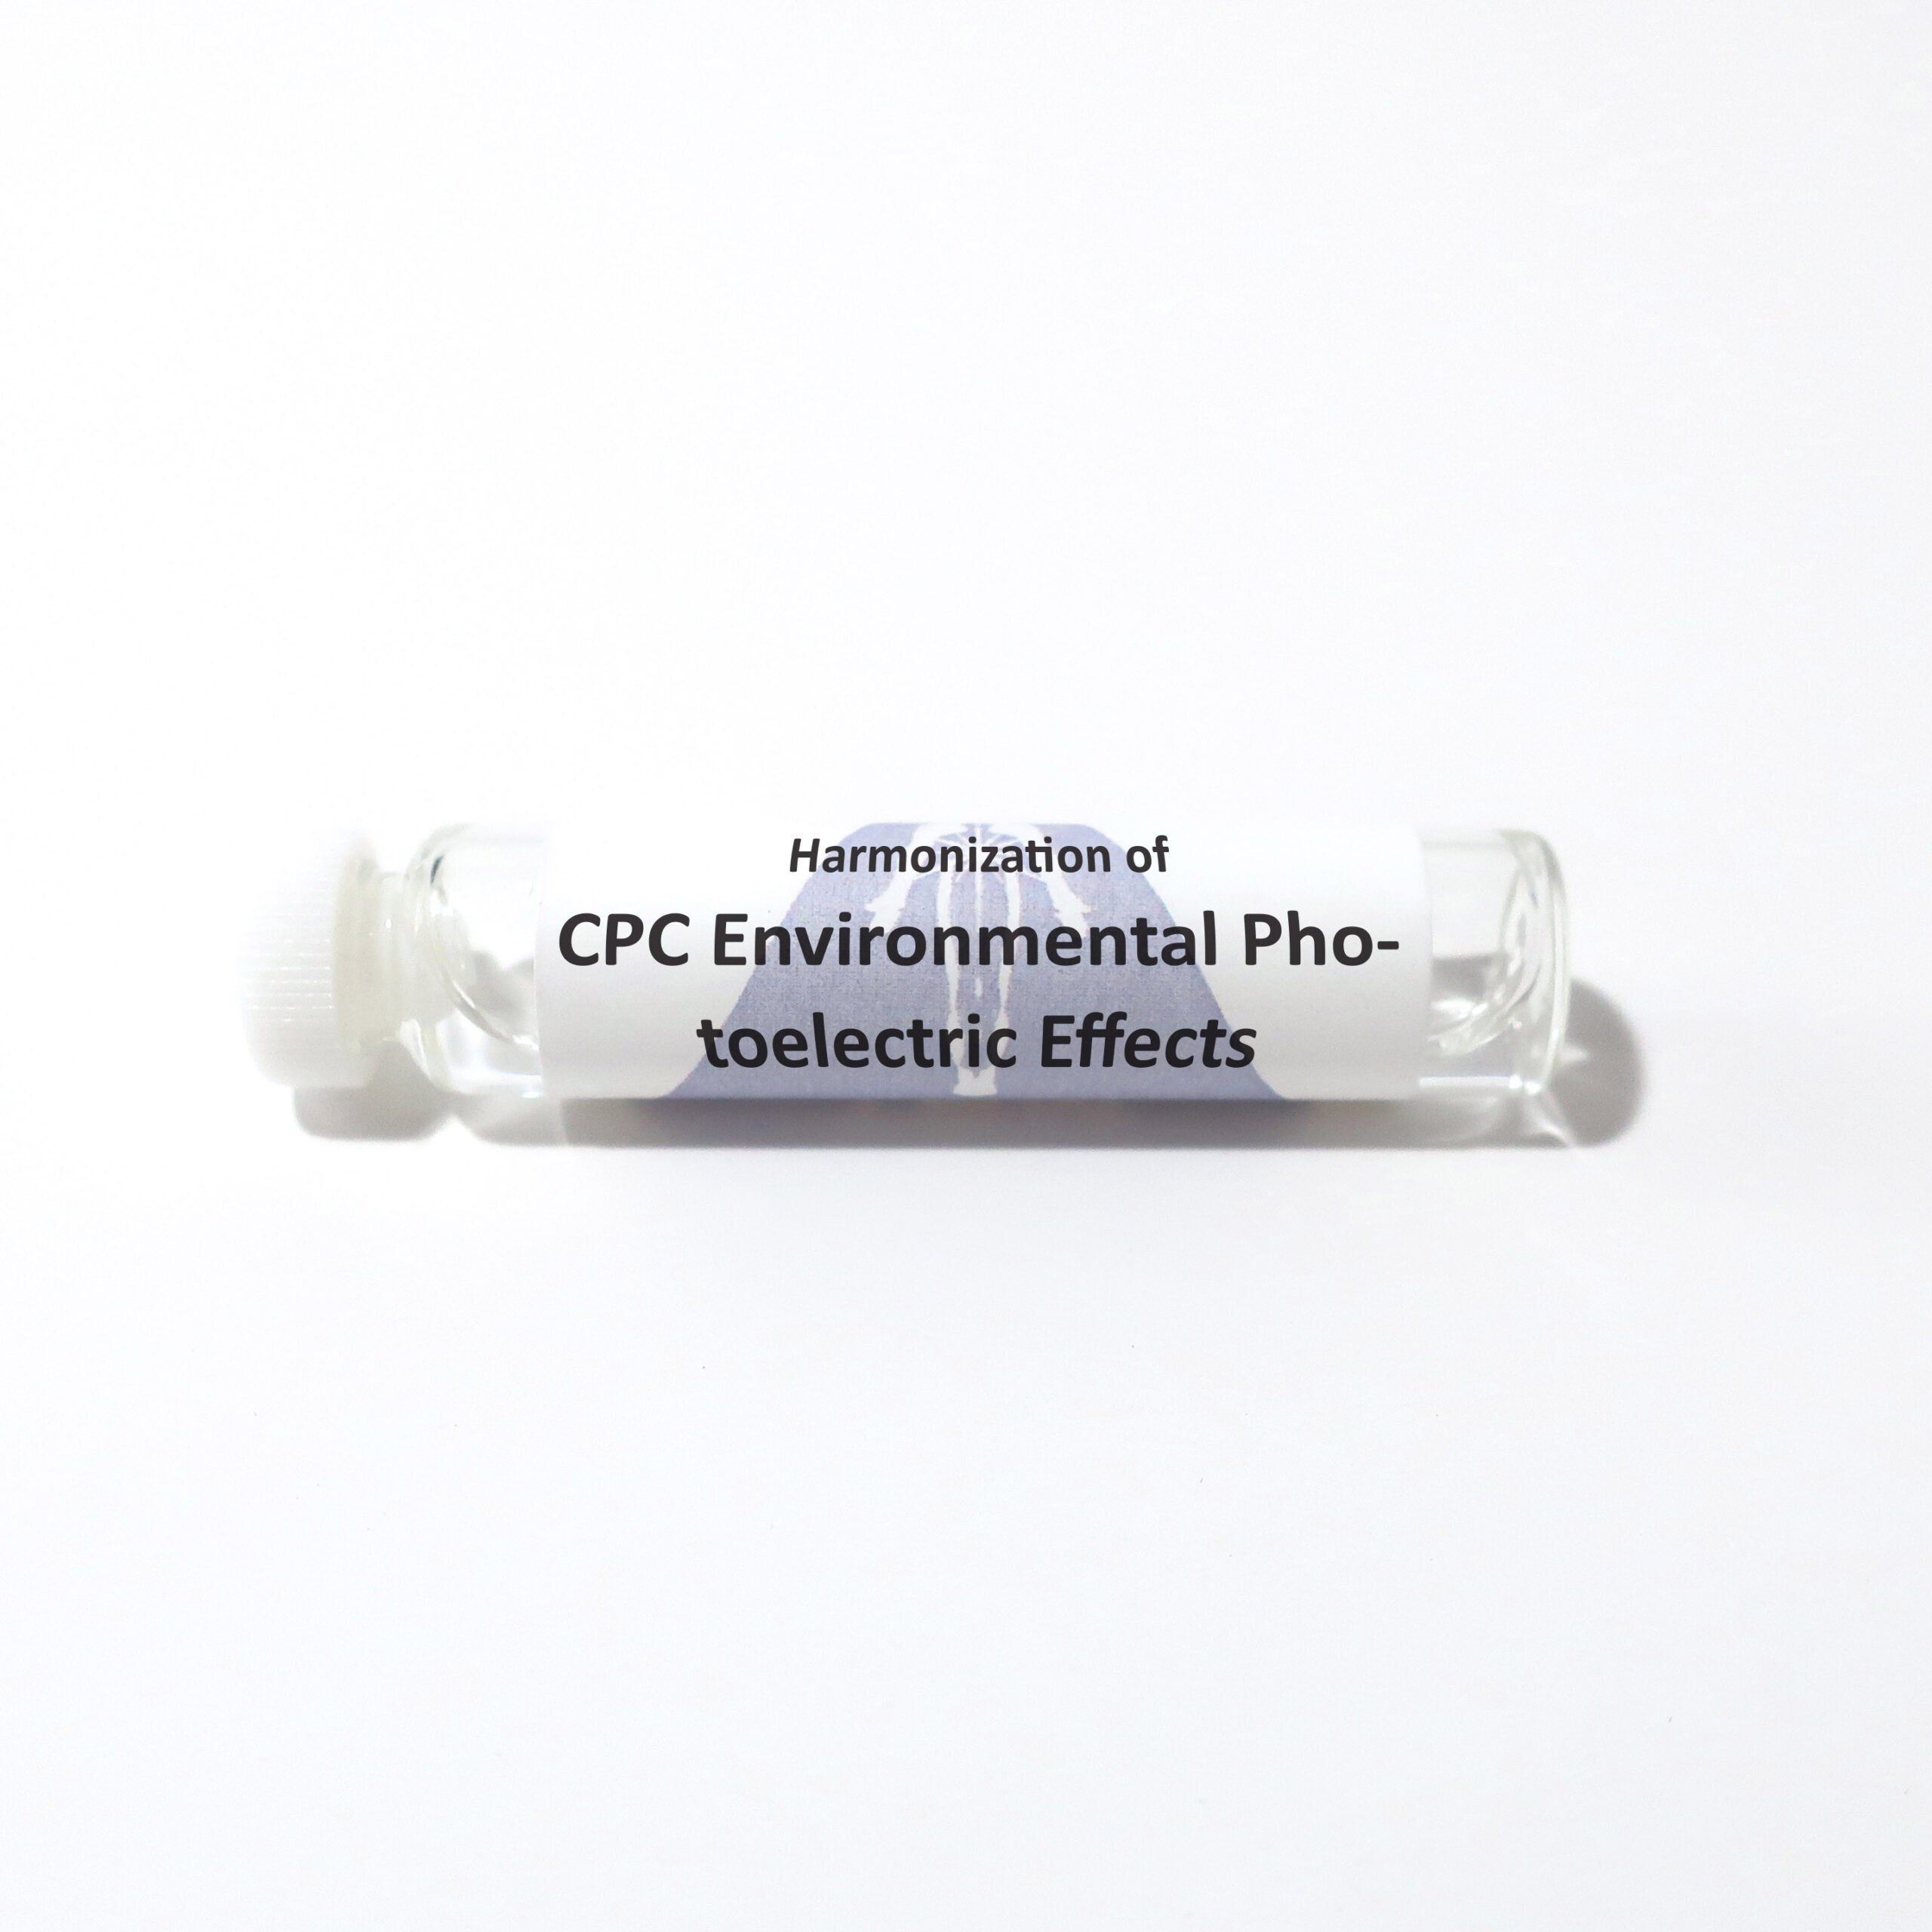 CPC Environmental Photoelectric Effects